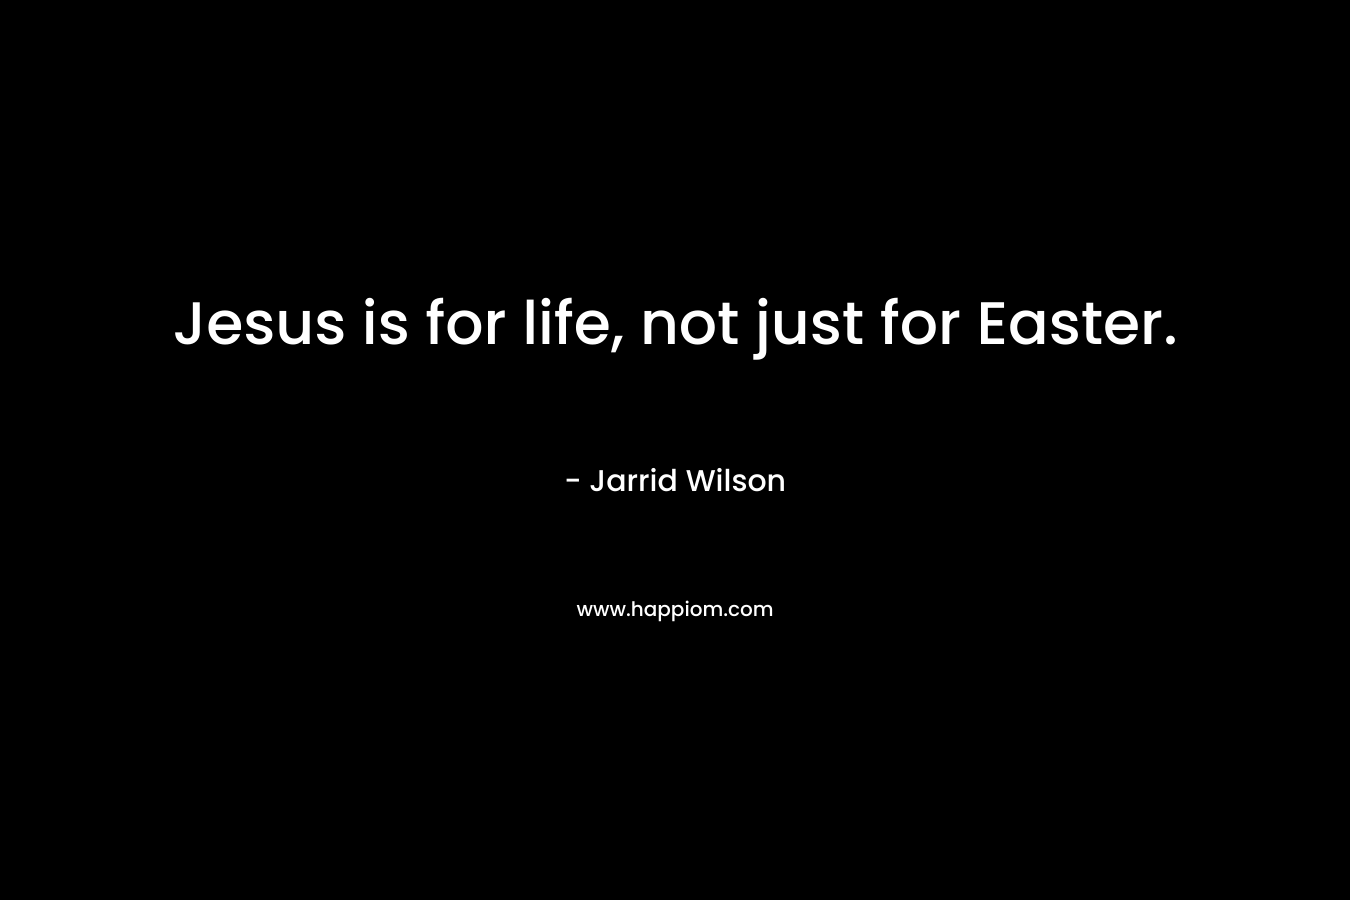 Jesus is for life, not just for Easter.